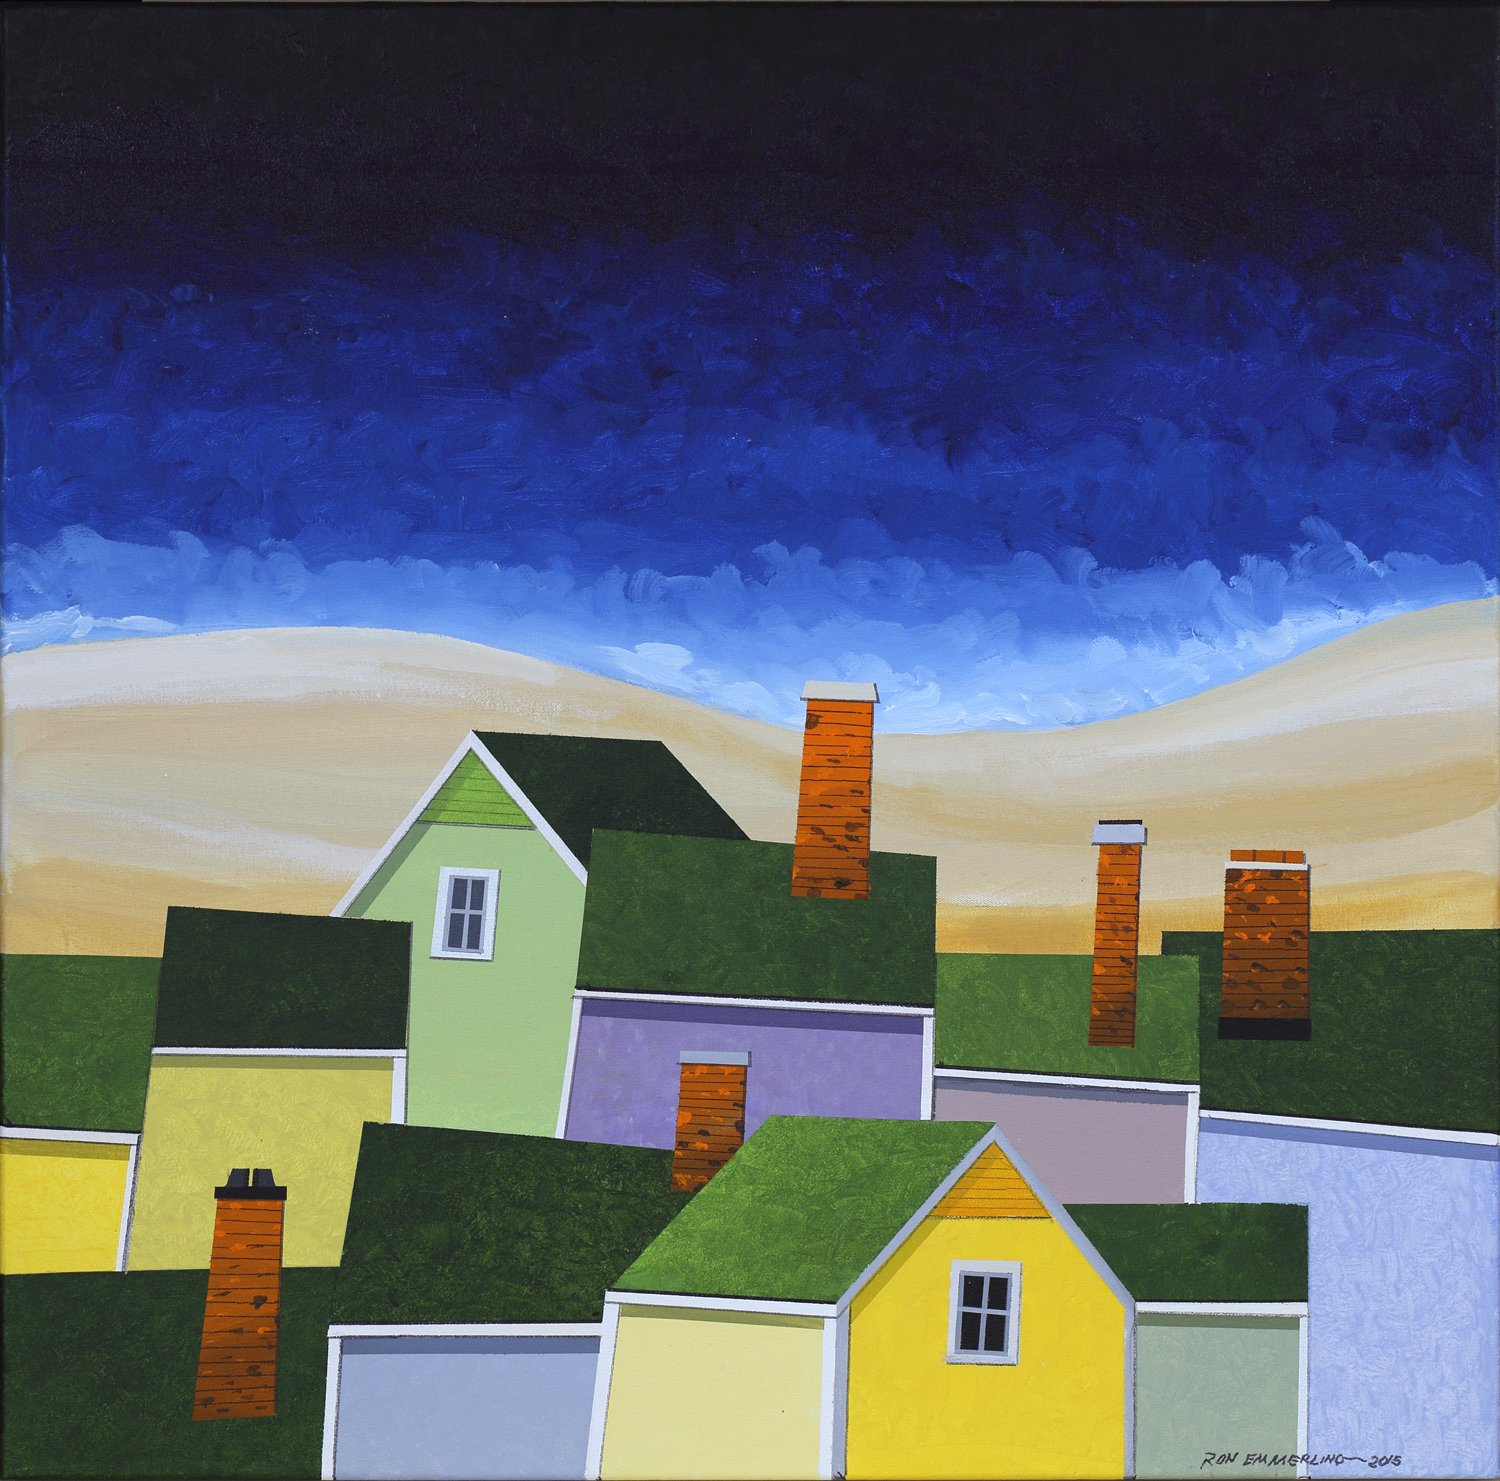 Ron Emmerling - Village By The Sea.jpeg